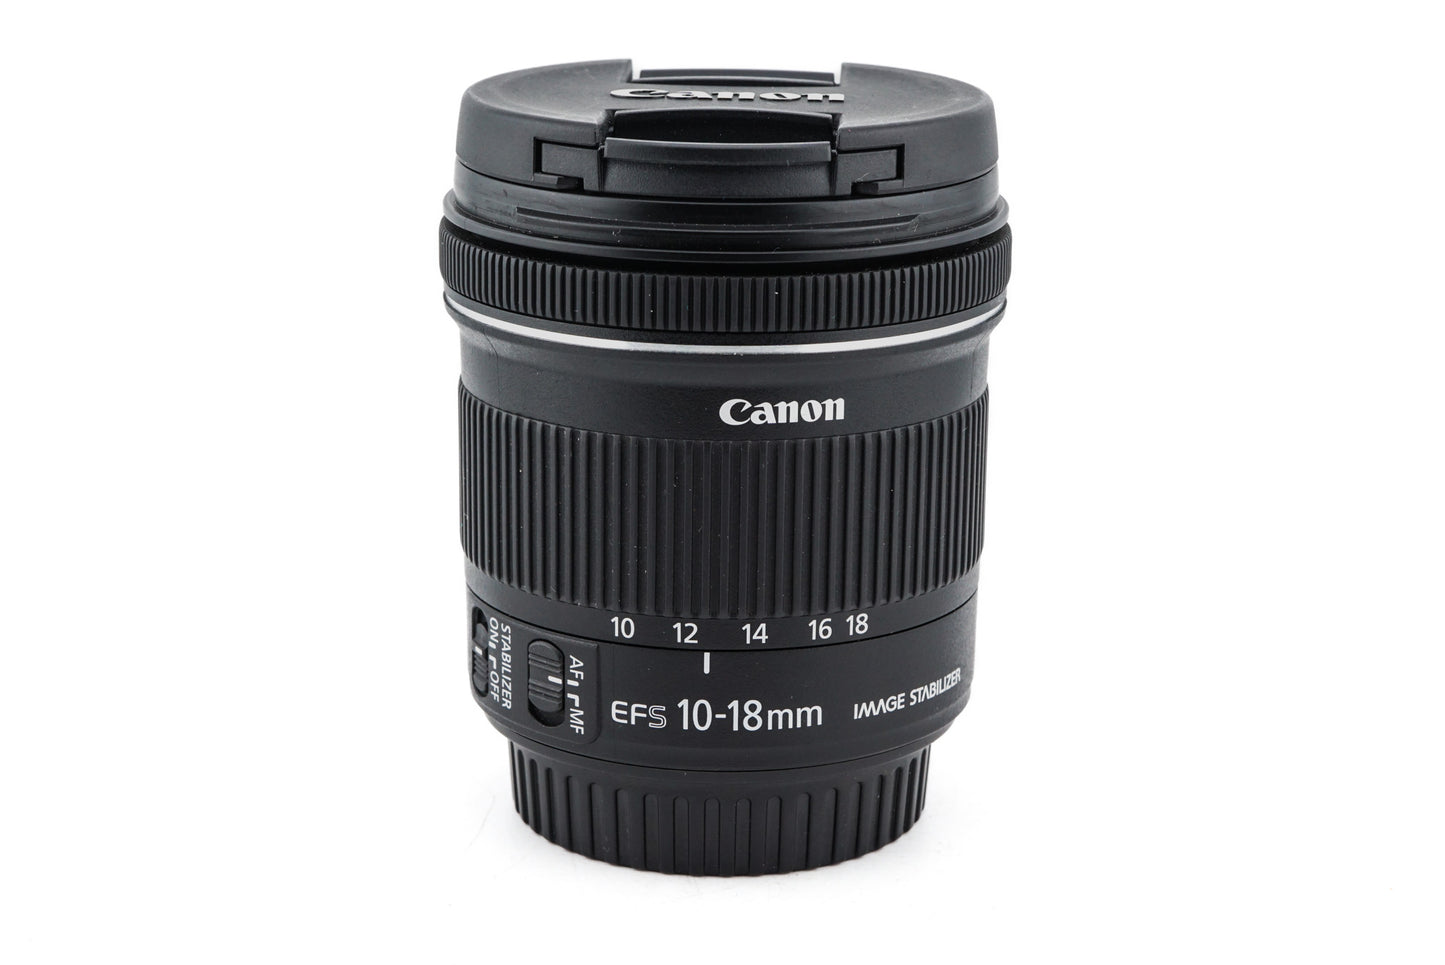 Canon 10-18mm f4.5-5.6 IS STM - Lens